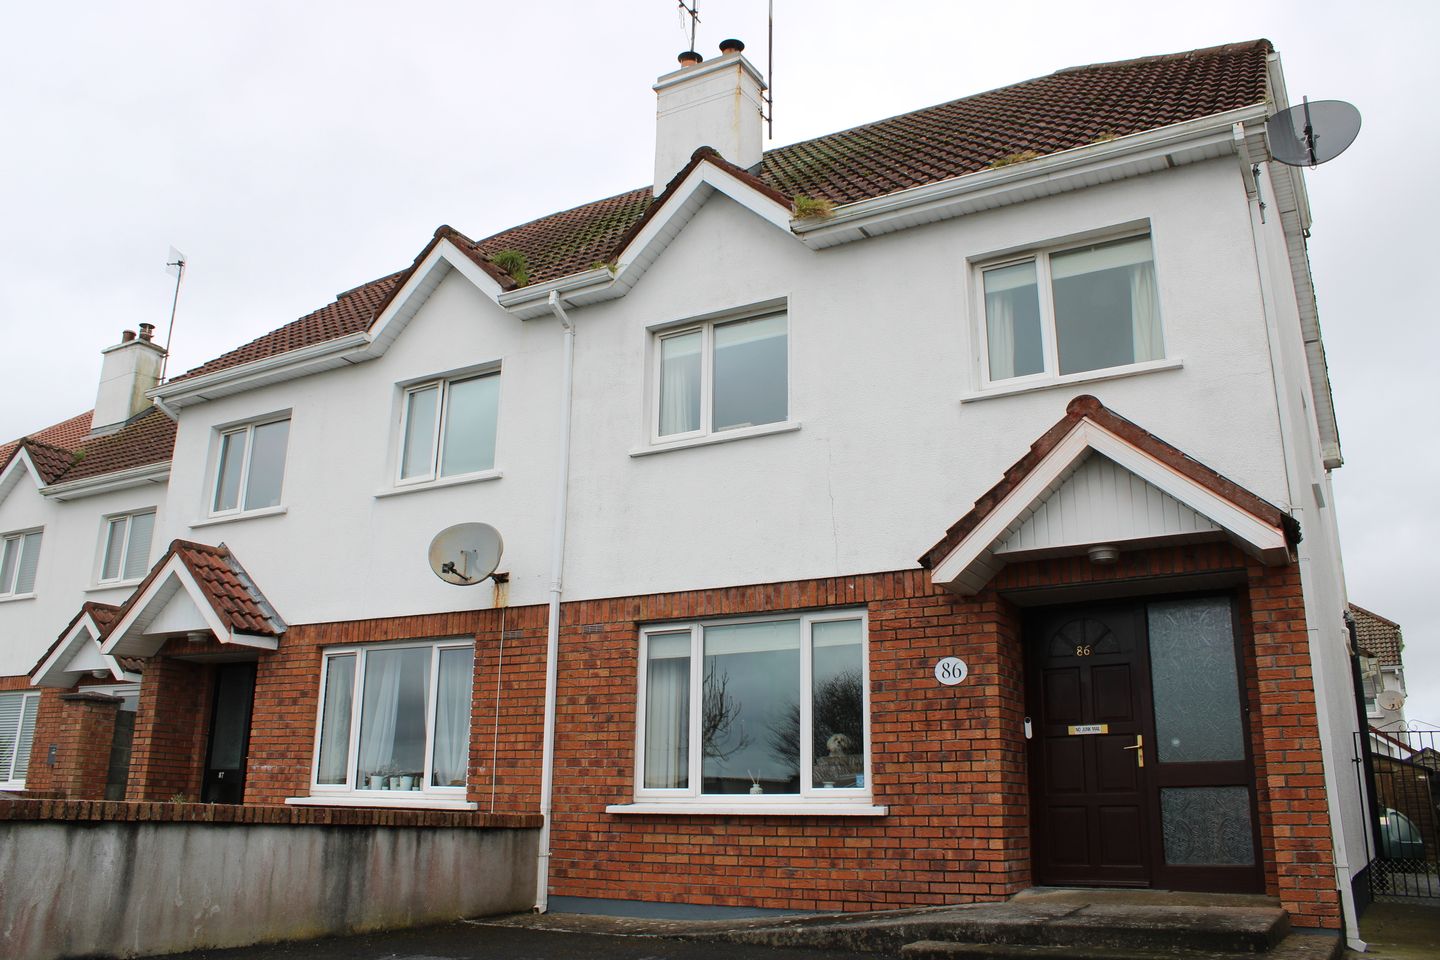 86 Woodfield, Galway Road, Tuam, Co. Galway, H54P036